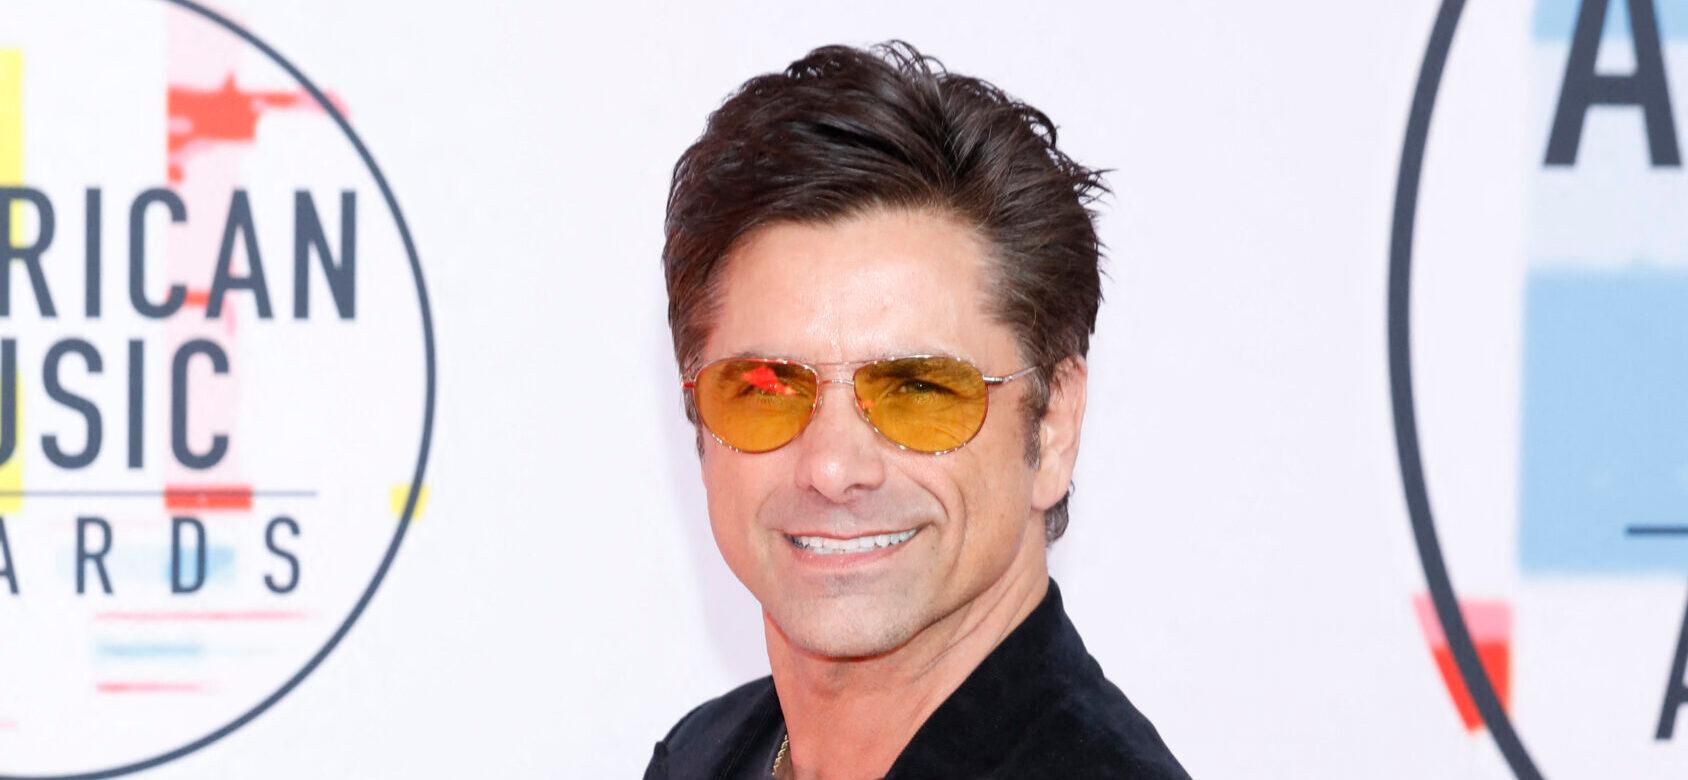 John Stamos’s Battle With Alcohol Addiction Led To A ‘Dark’ Place